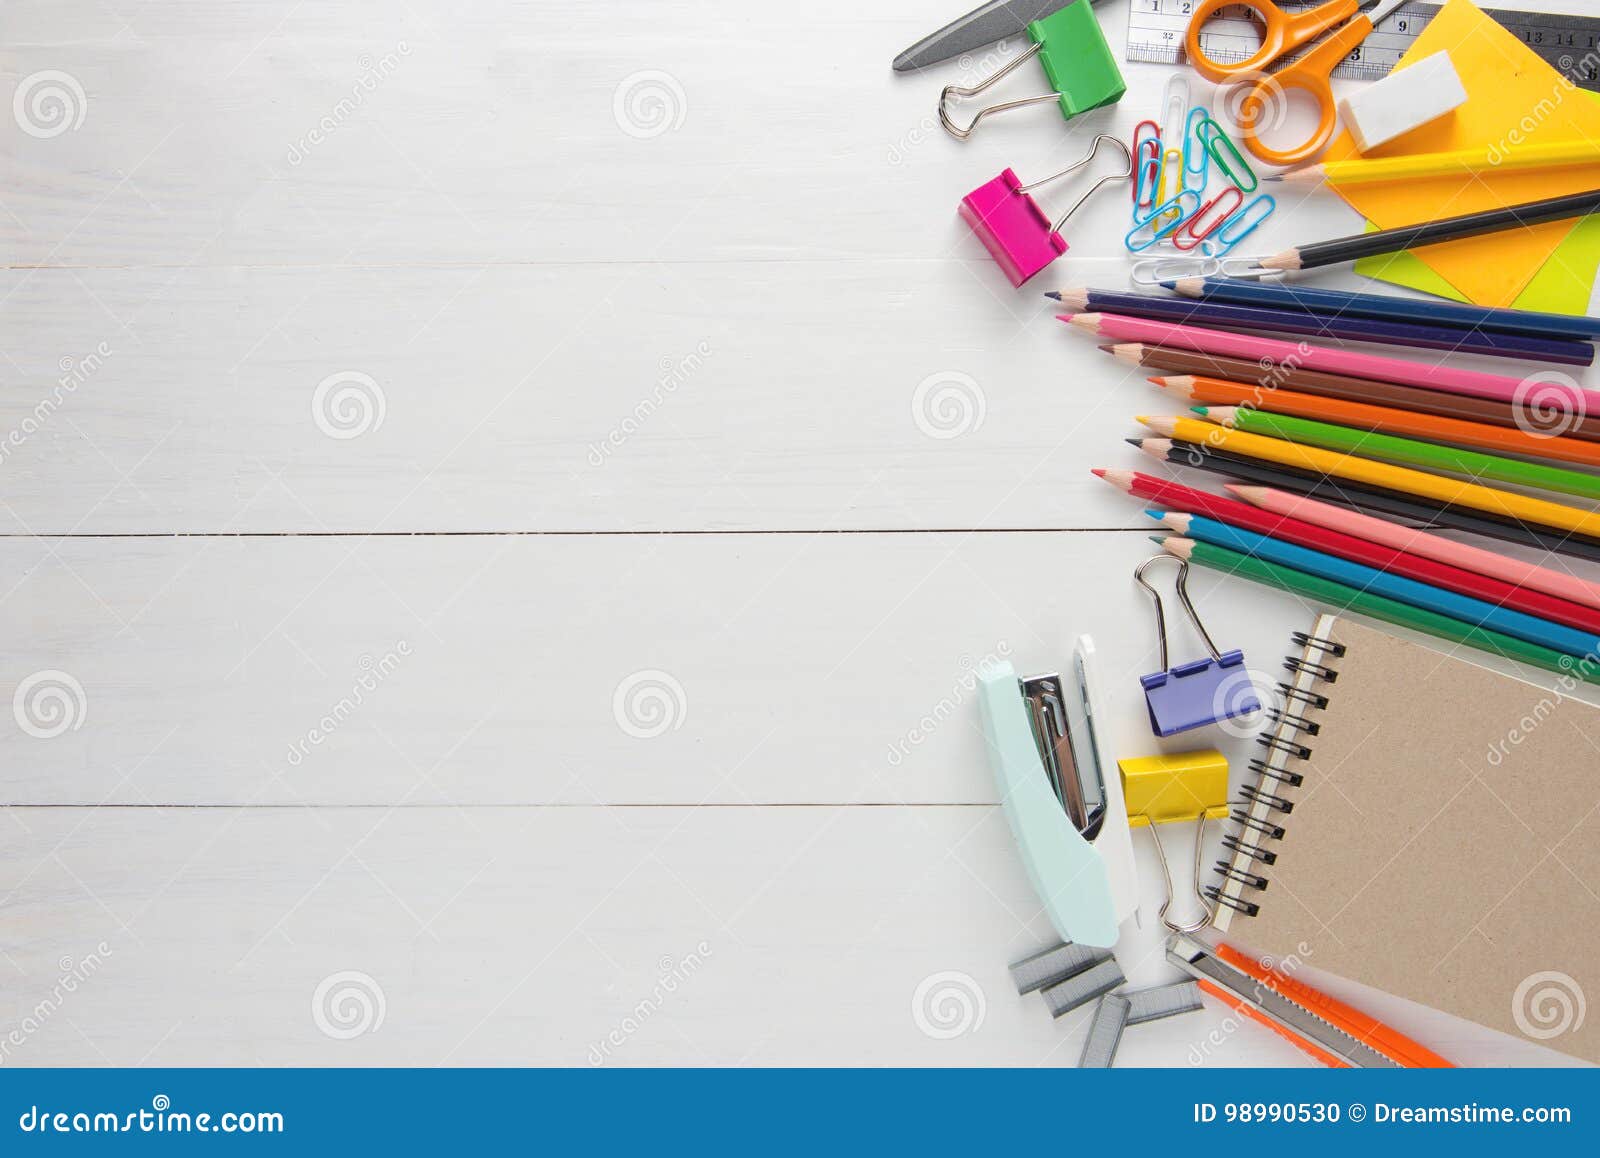 school stationery and office supplies